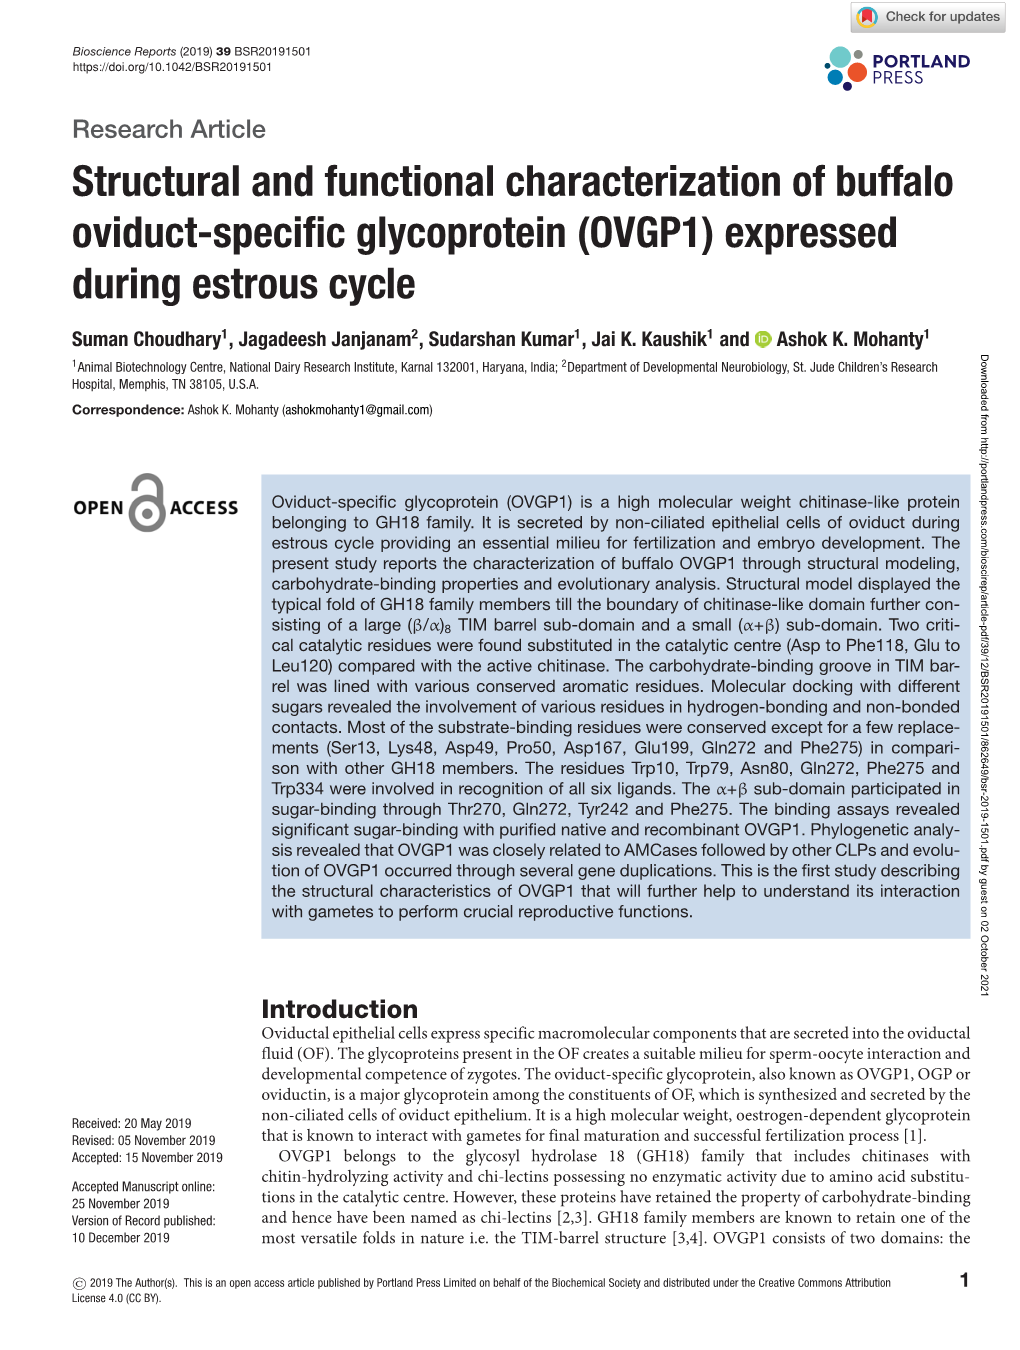 Structural and Functional Characterization of Buffalo Oviduct-Speciﬁc Glycoprotein (OVGP1) Expressed During Estrous Cycle